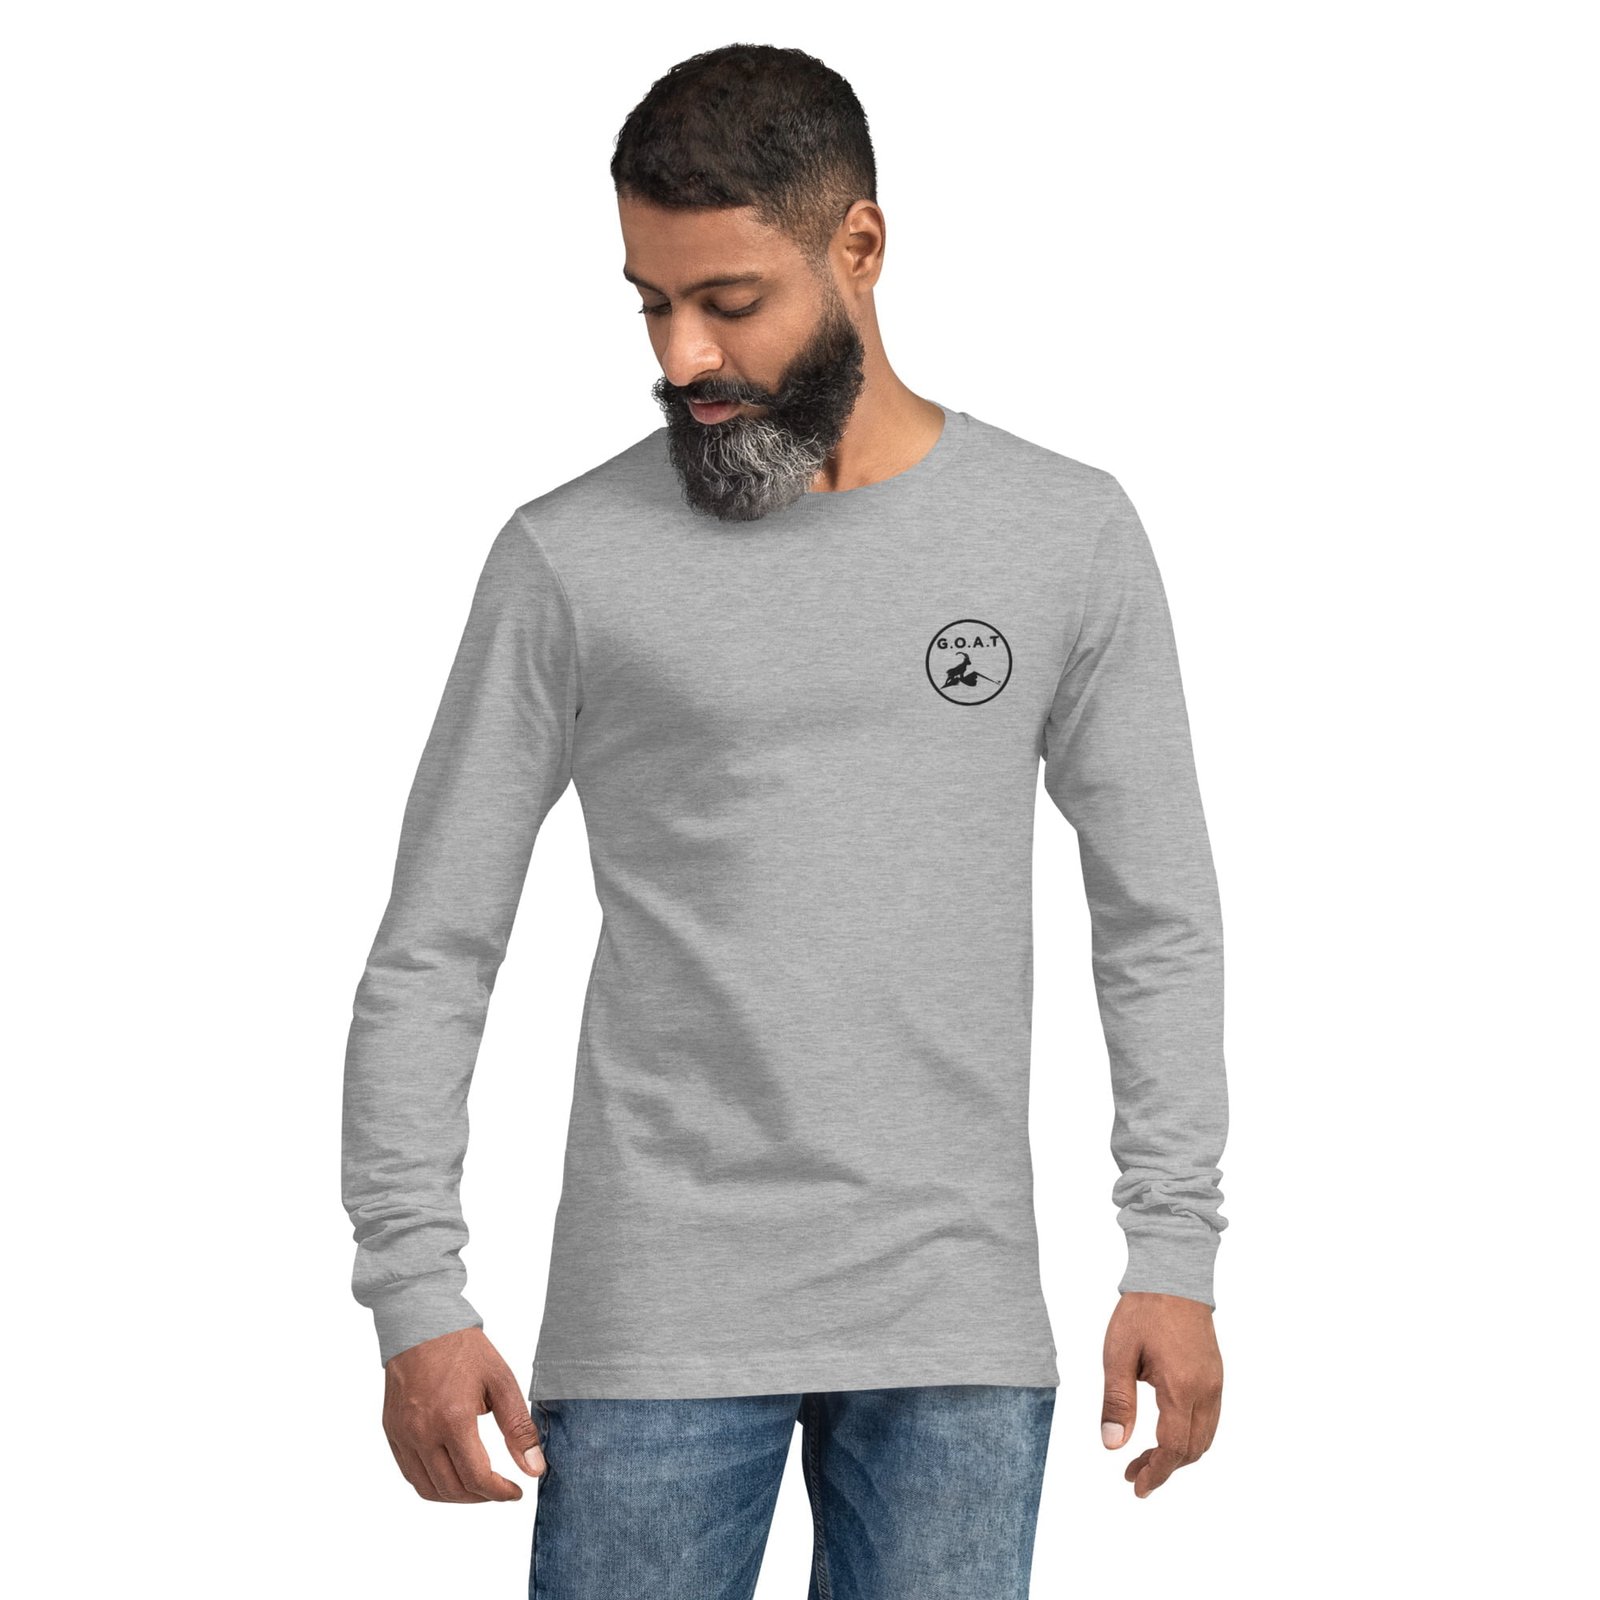 Logo Unisex Long Sleeve Tee - Greatest Of All Time The Greatest of All T-shirts